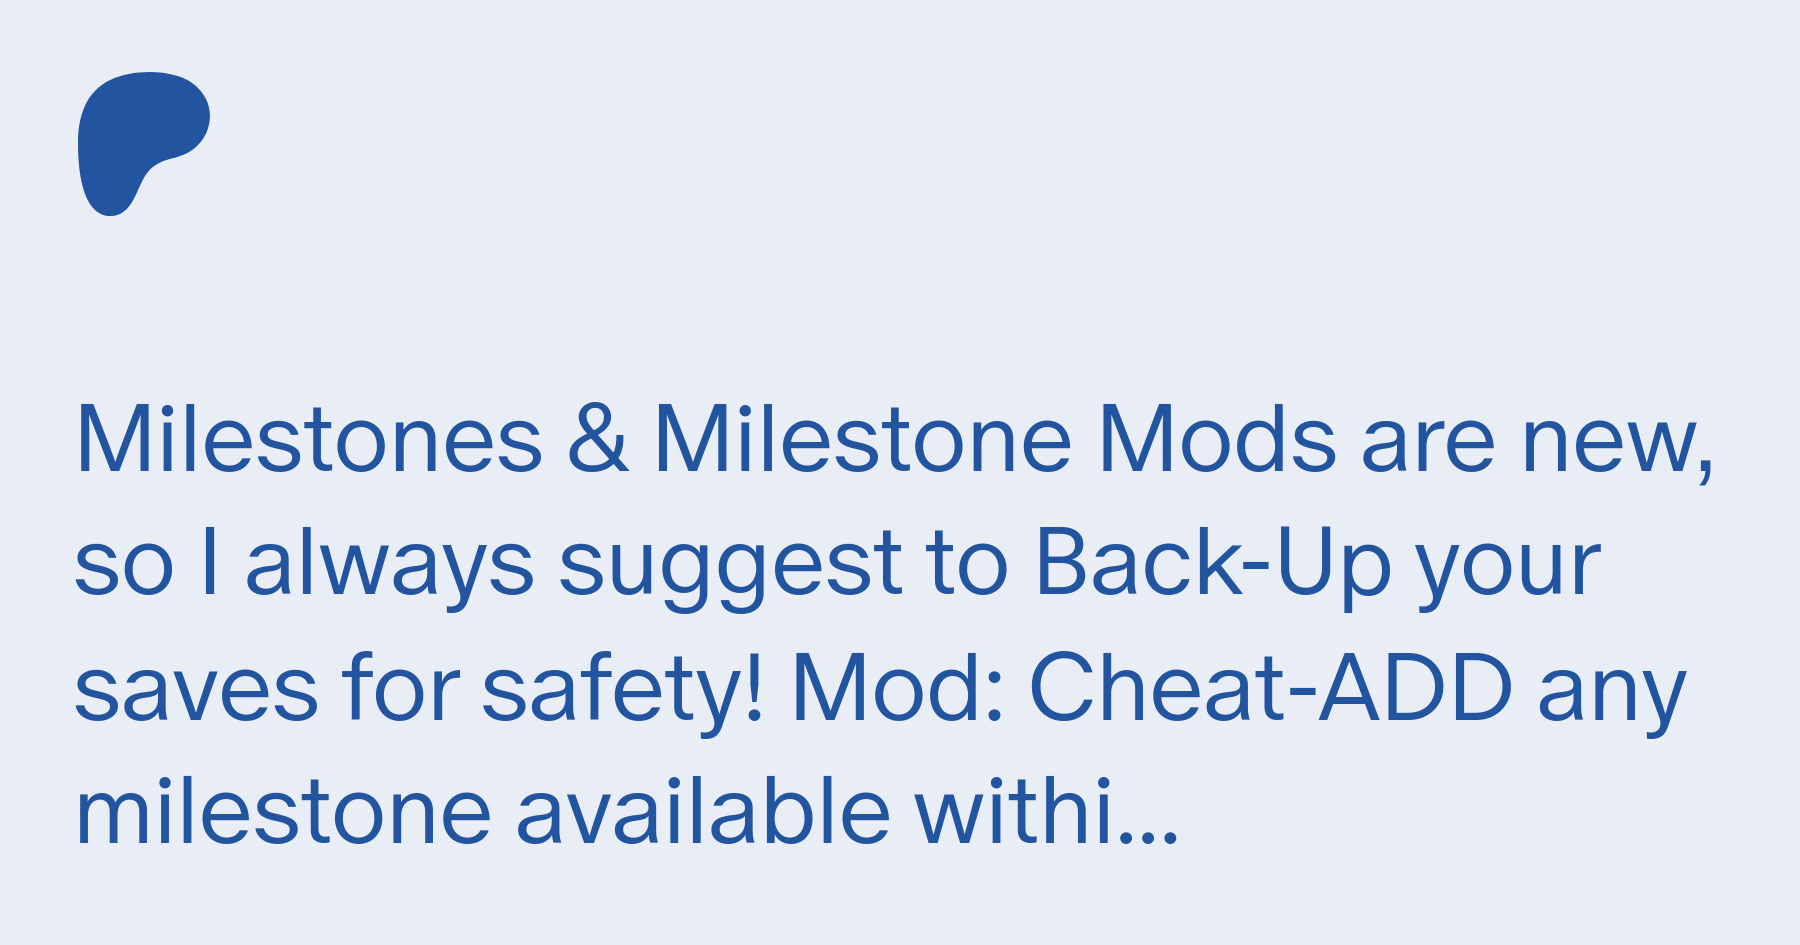 Mod] Milestone Cheats: ADD / REMOVE any milestone in Any age, and some  Extra Cheats! (requires 'Growing Together') - Sims 4 Mod